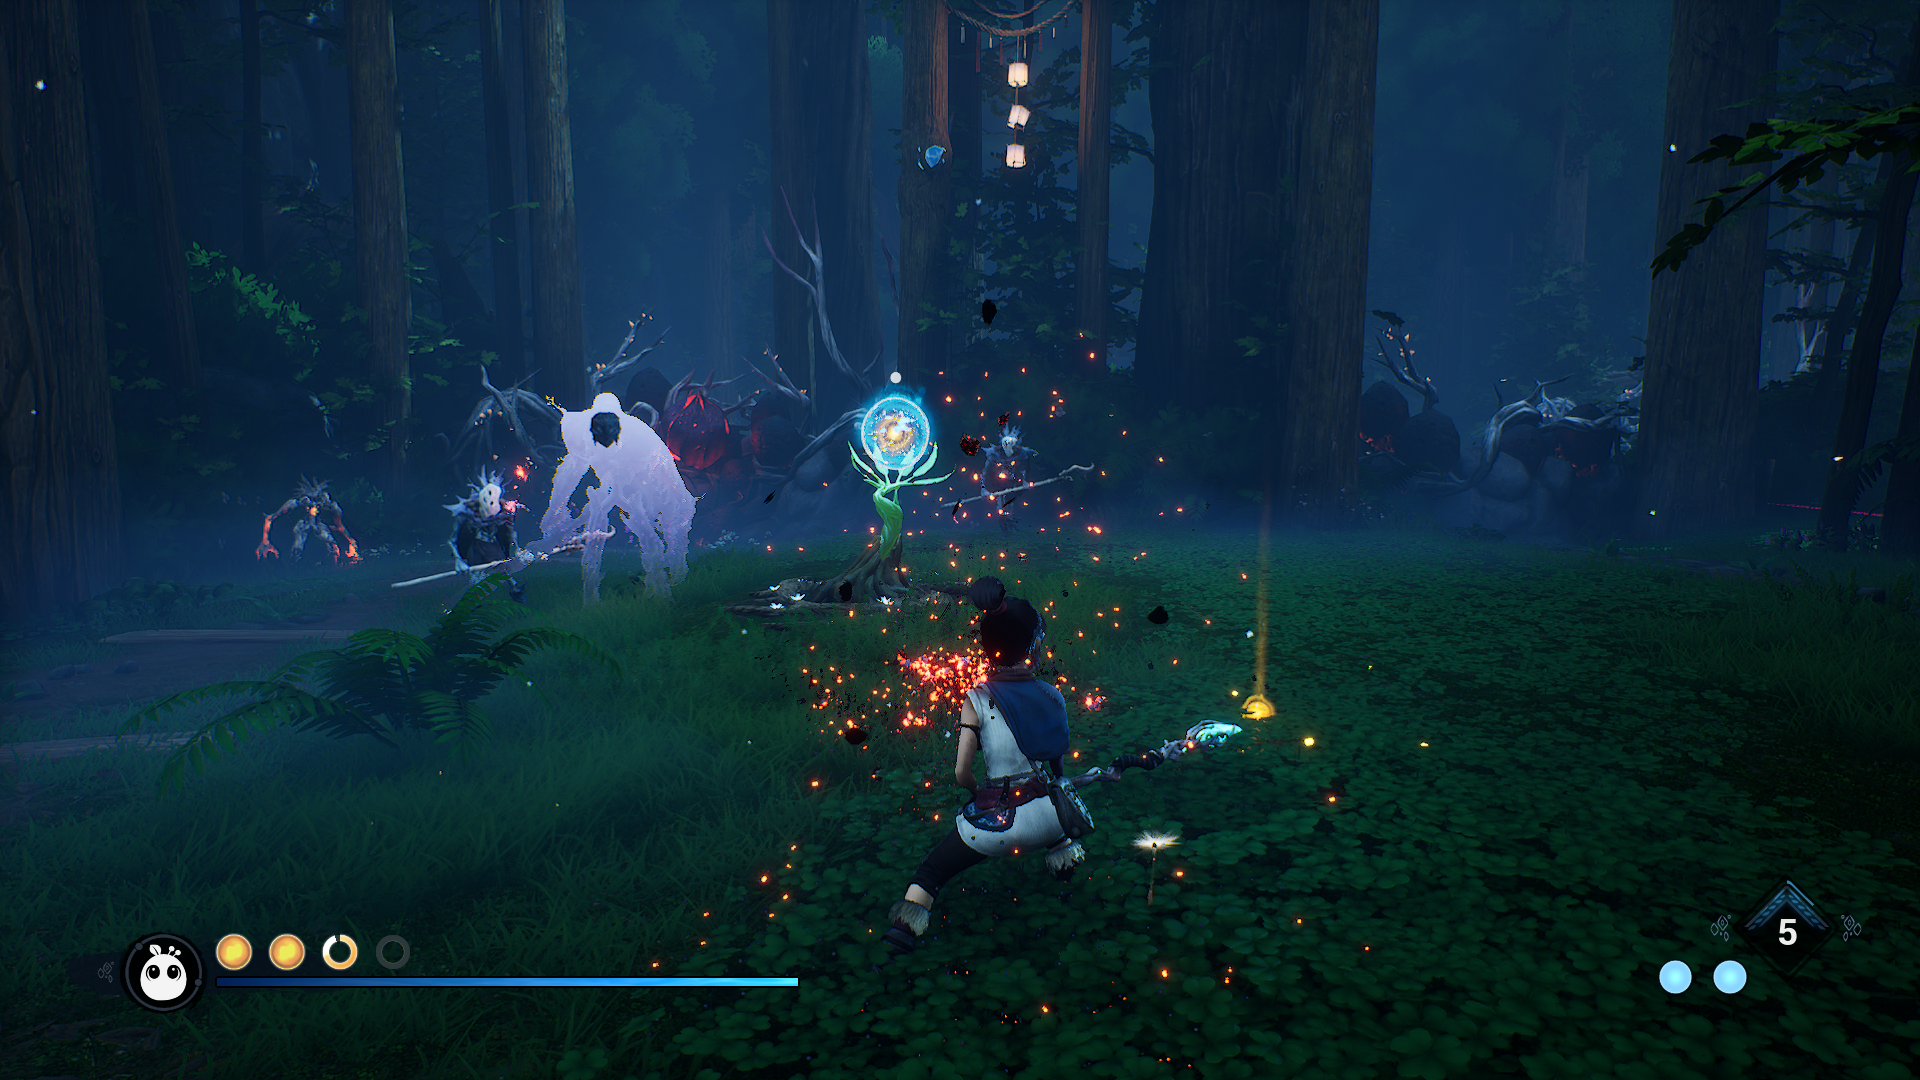 Kena fighting a ghost and some normal enemies in a gloomy, dark forest 